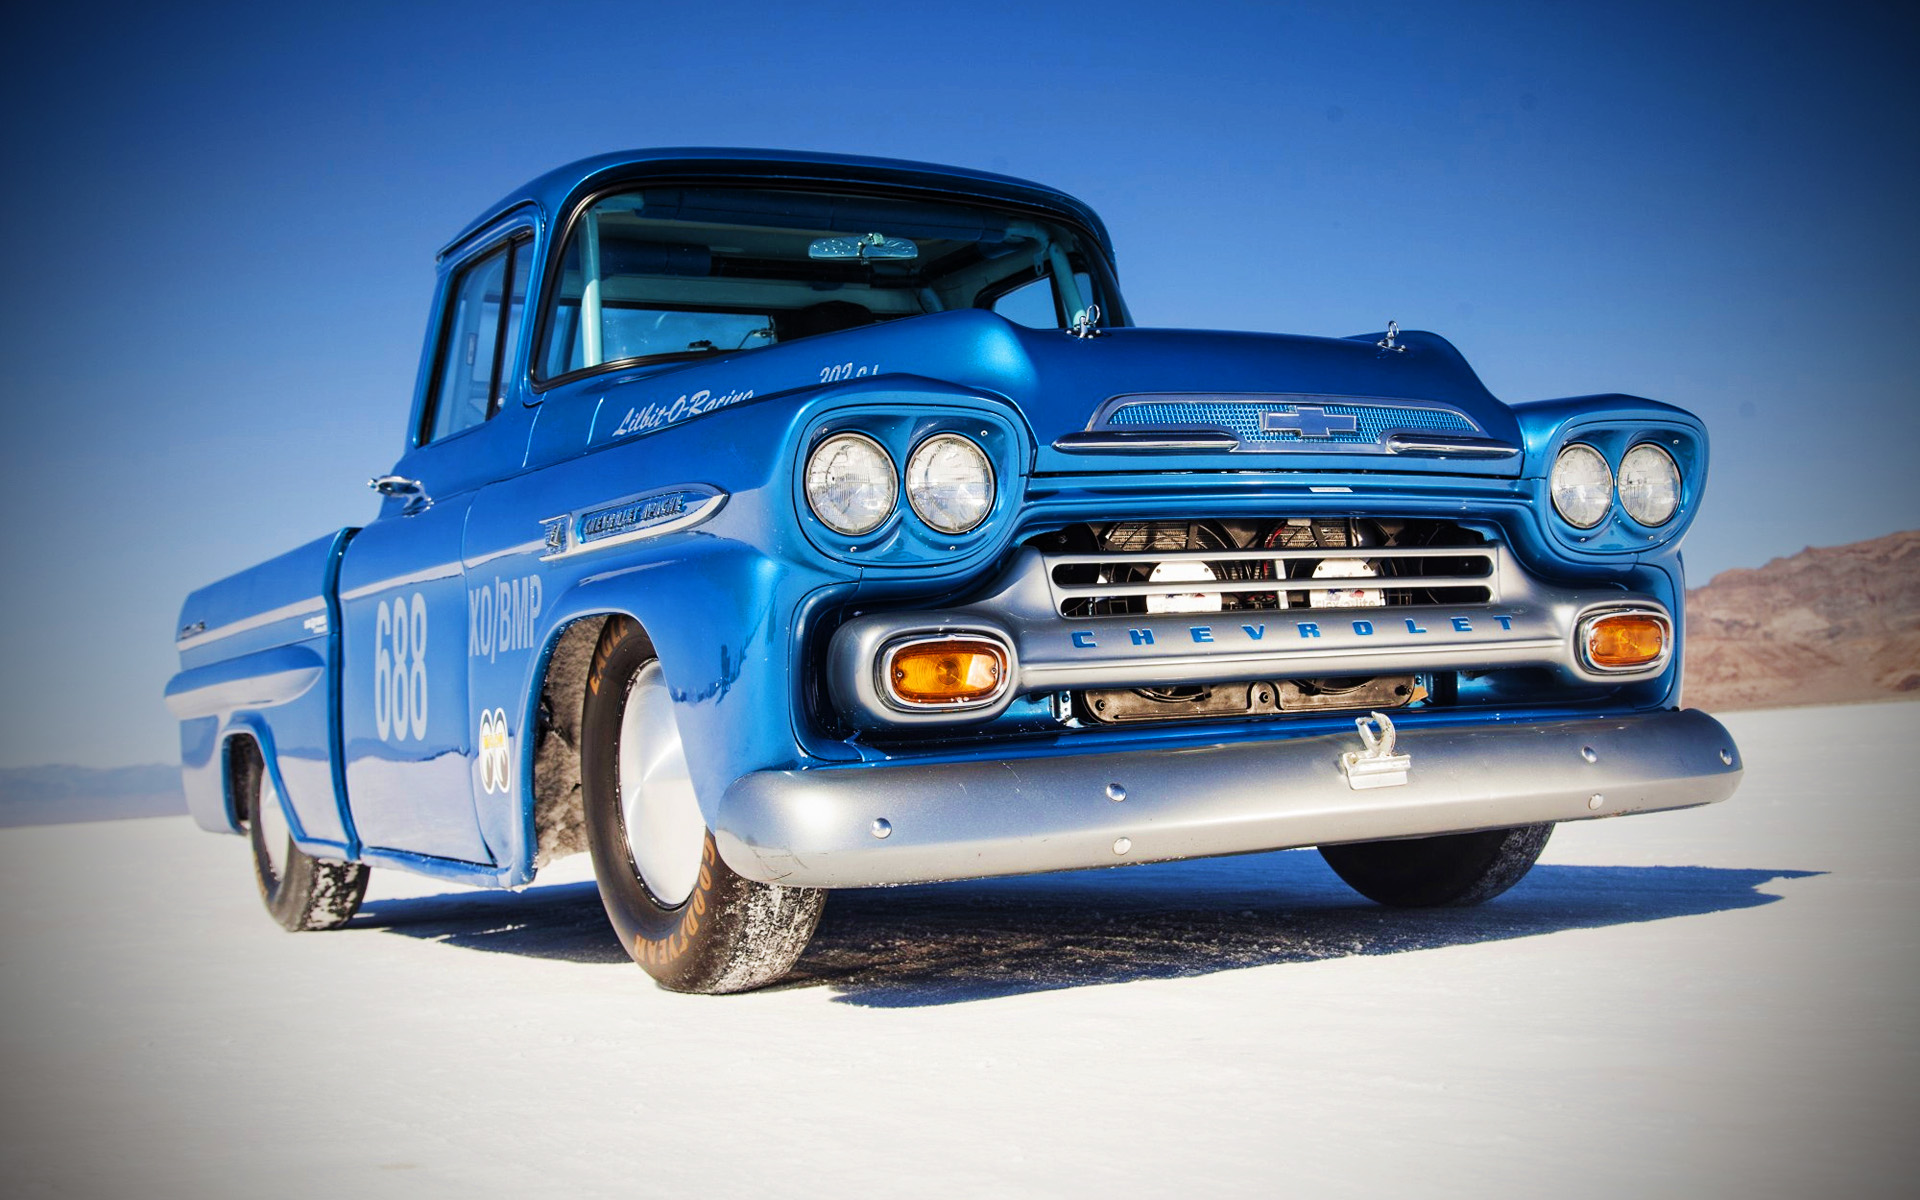 Download wallpapers Chevrolet Apache 3100 retro cars 1955 cars